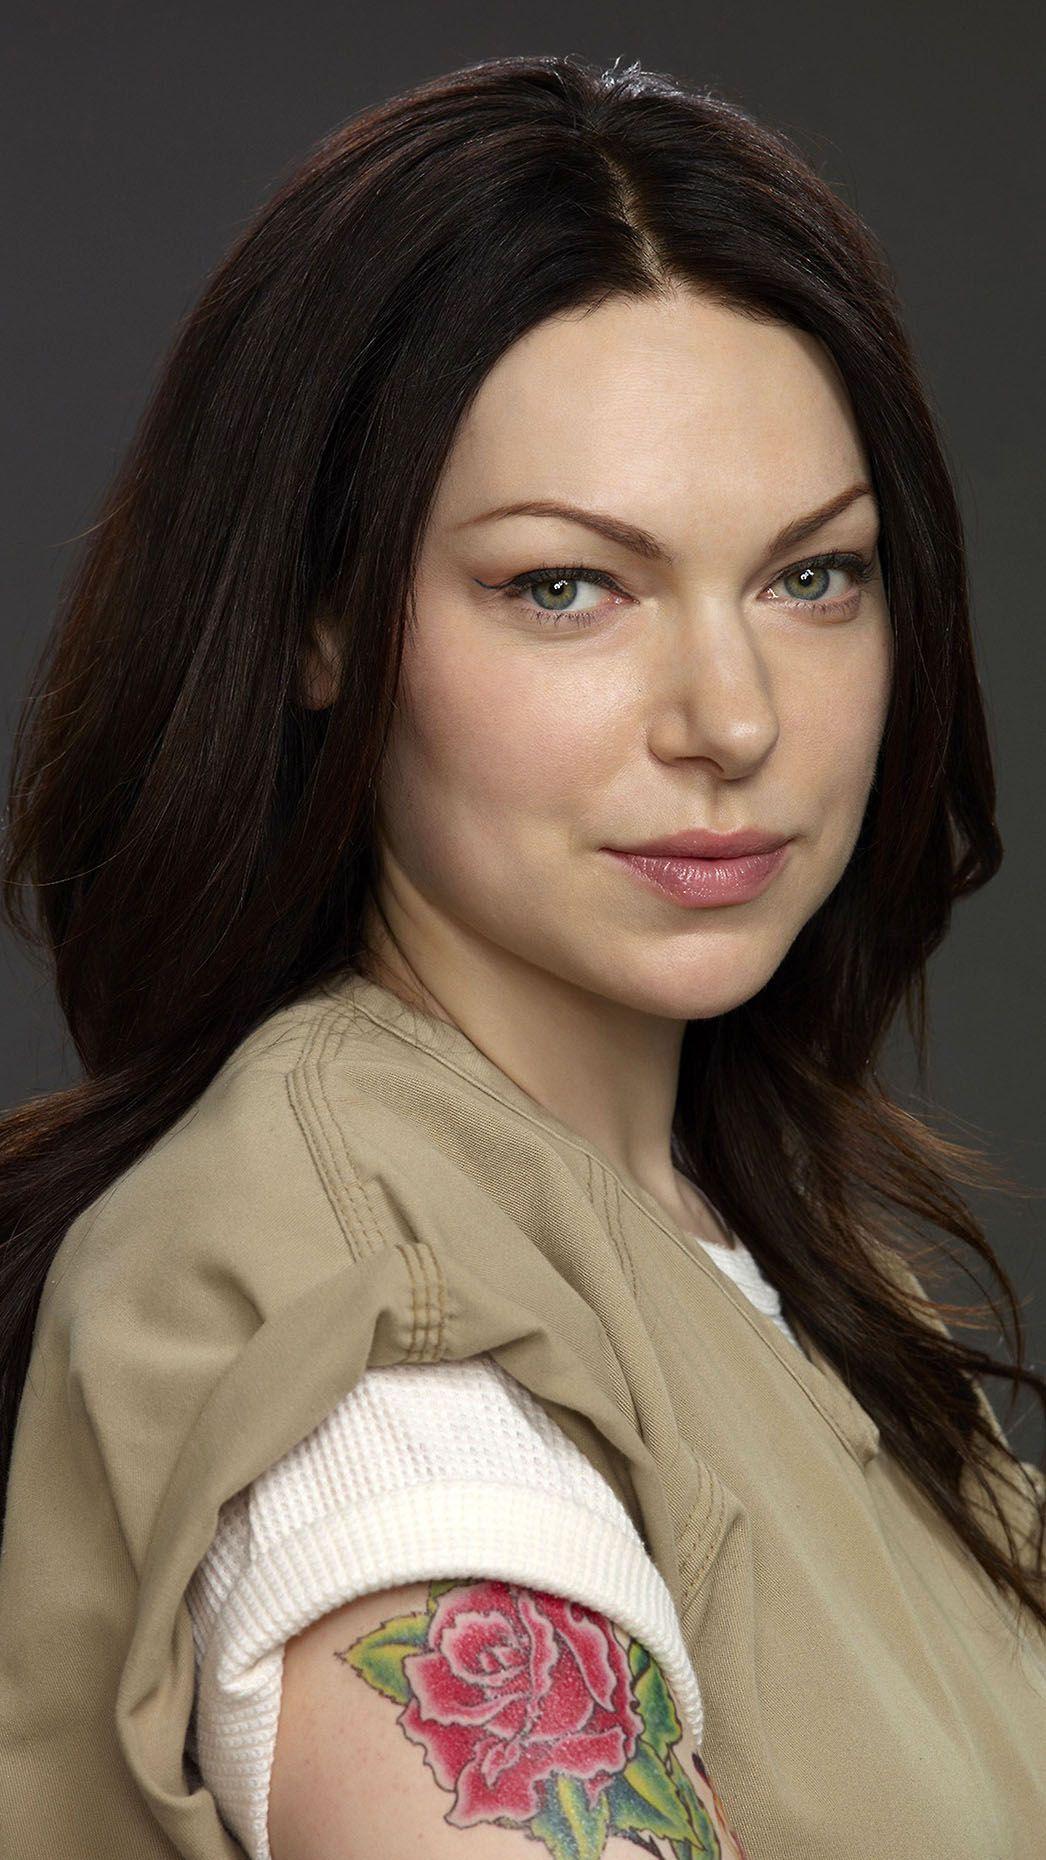 Orange is the New Black Alex Vause Wallpaper for iPhone X, 6